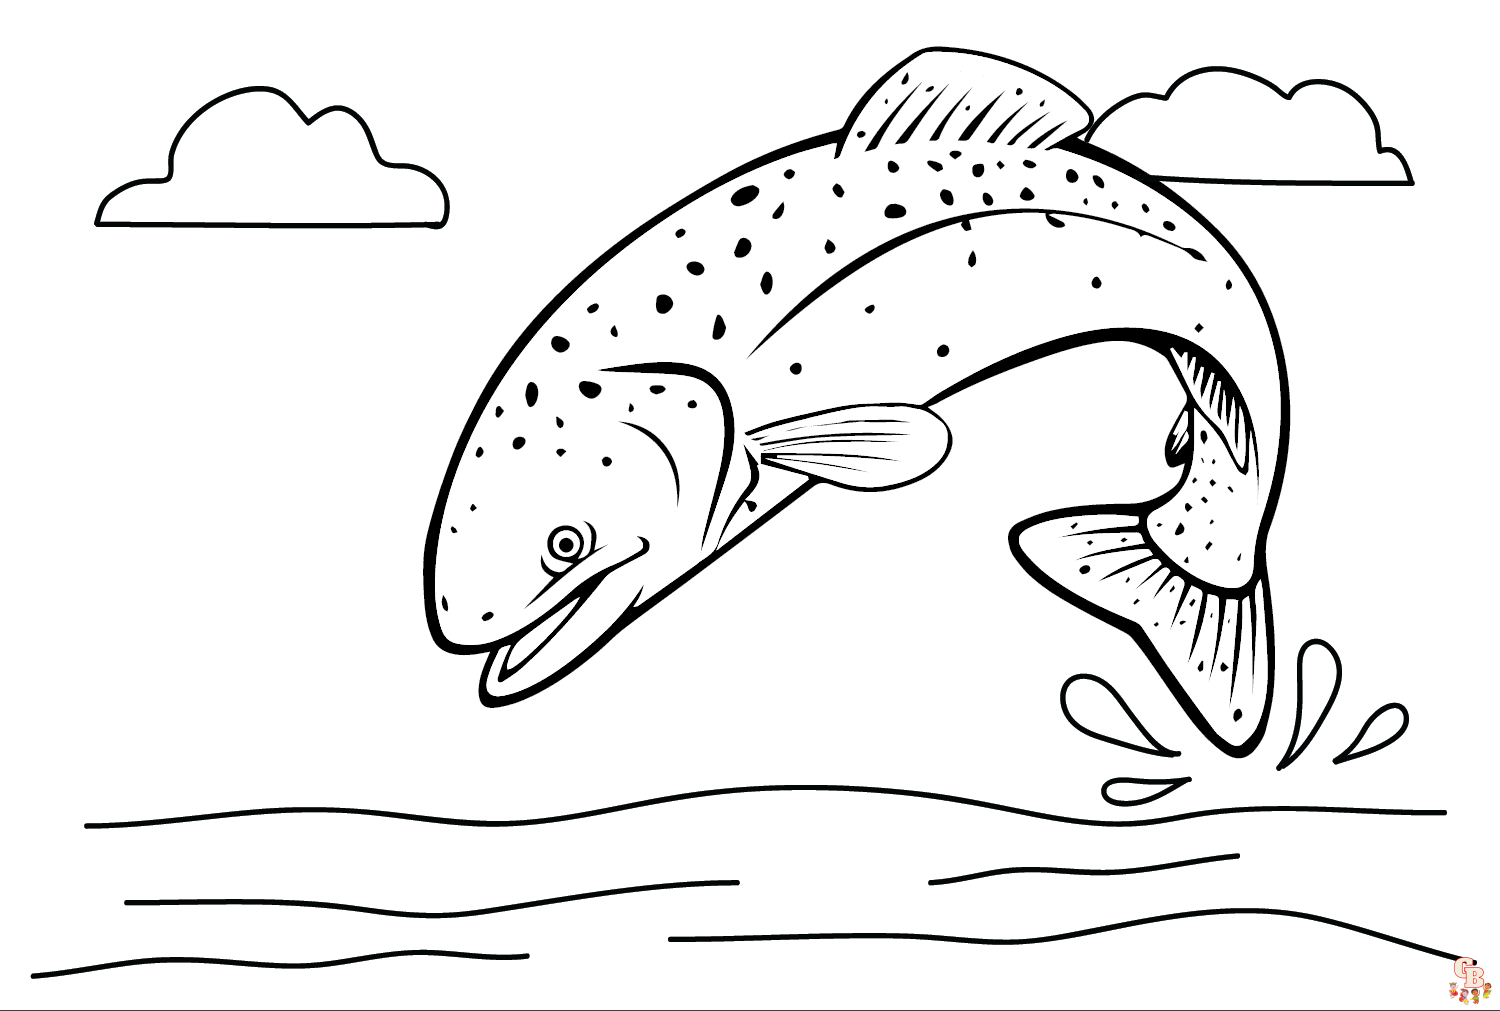 Salmon coloring pages printable